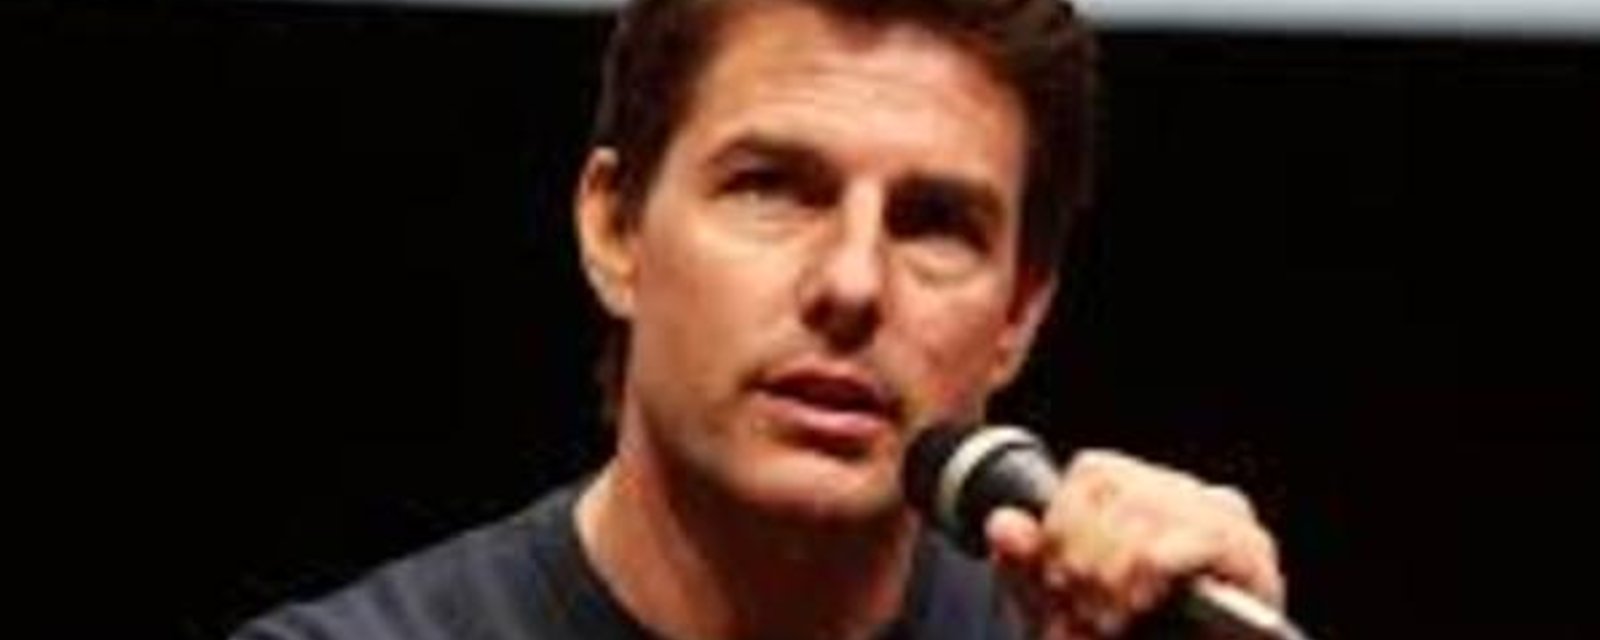 Durs moments pour Tom Cruise...